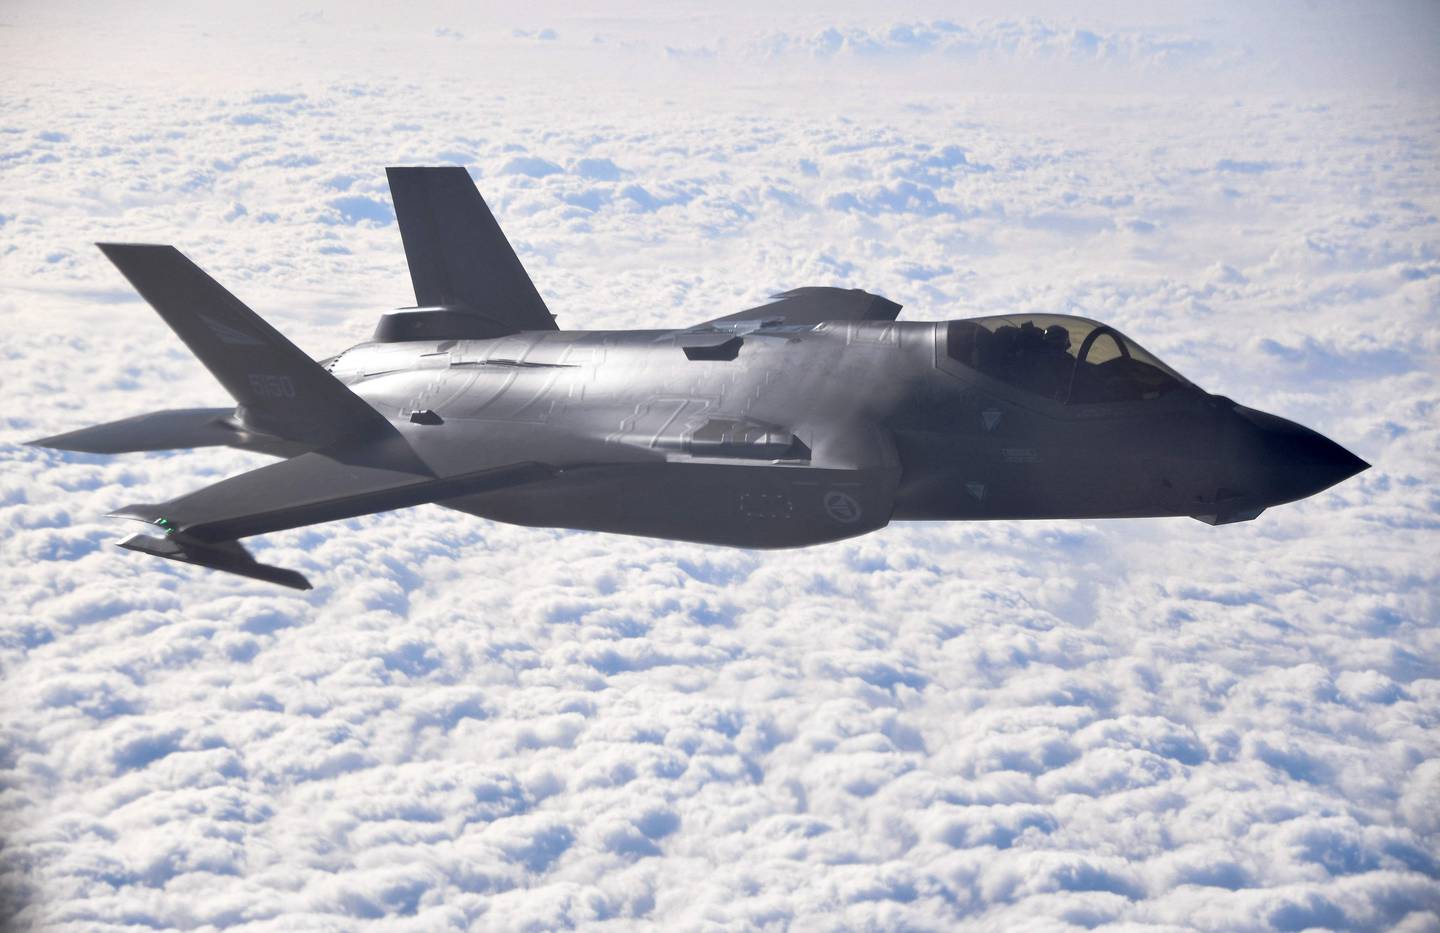 A Norwegian F-35 fighter jet during Nato exercise 'Cold Response' over Norway in March. AFP